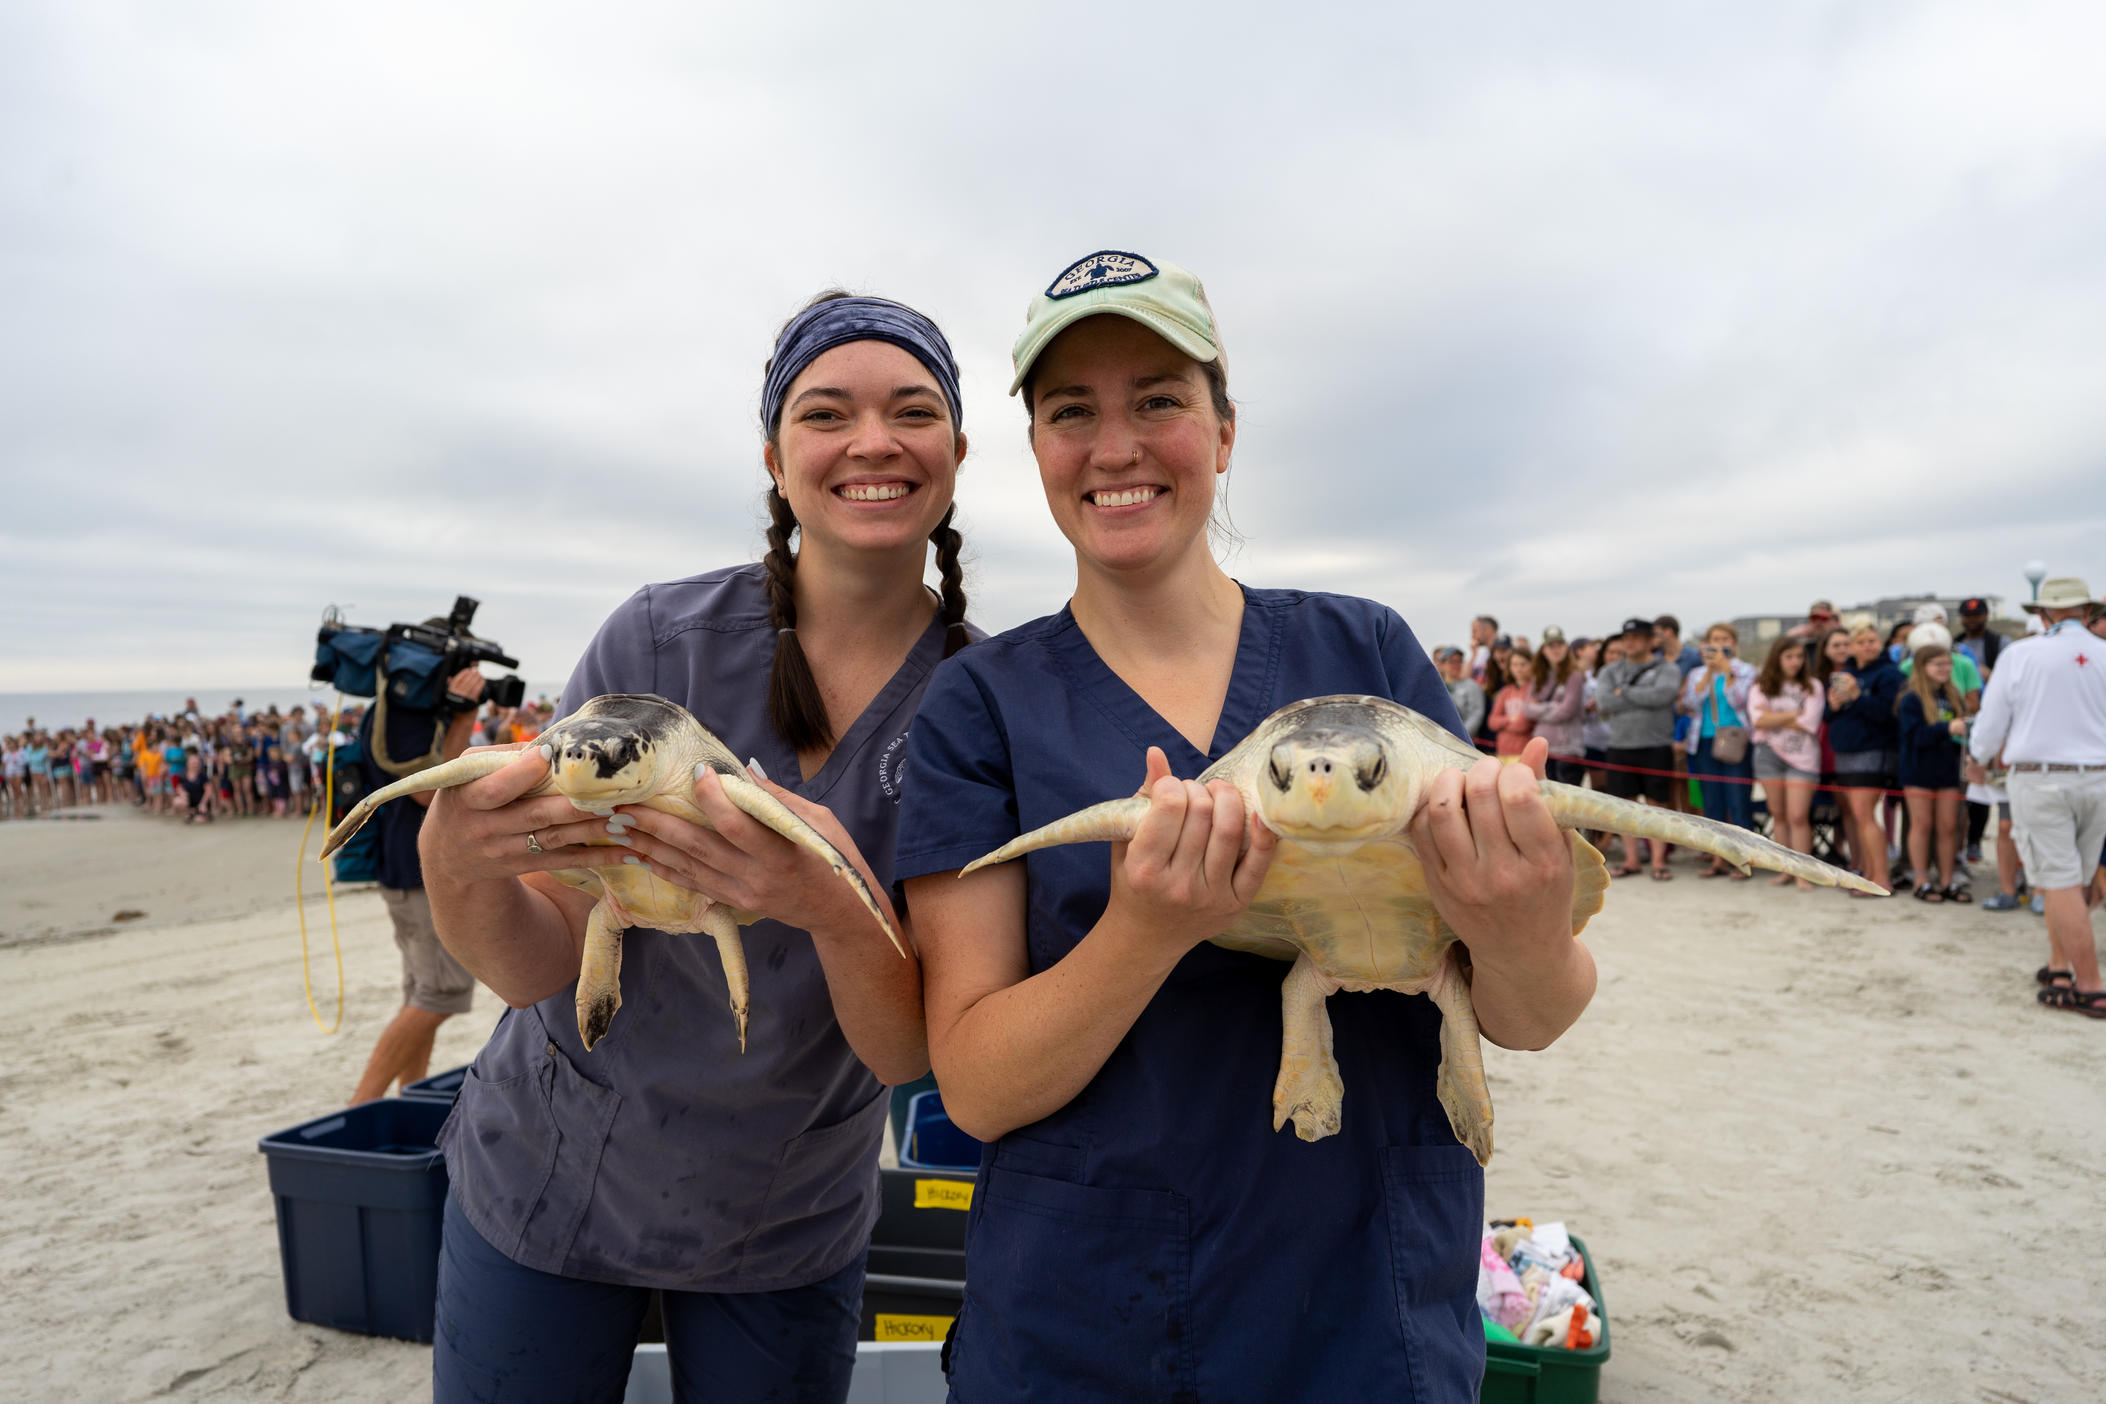 On Wednesday, April 4, more than one thousand supporters gathered on Great Dunes Beach Deck Jekyll Island, Georgia to cheer the turtles on.